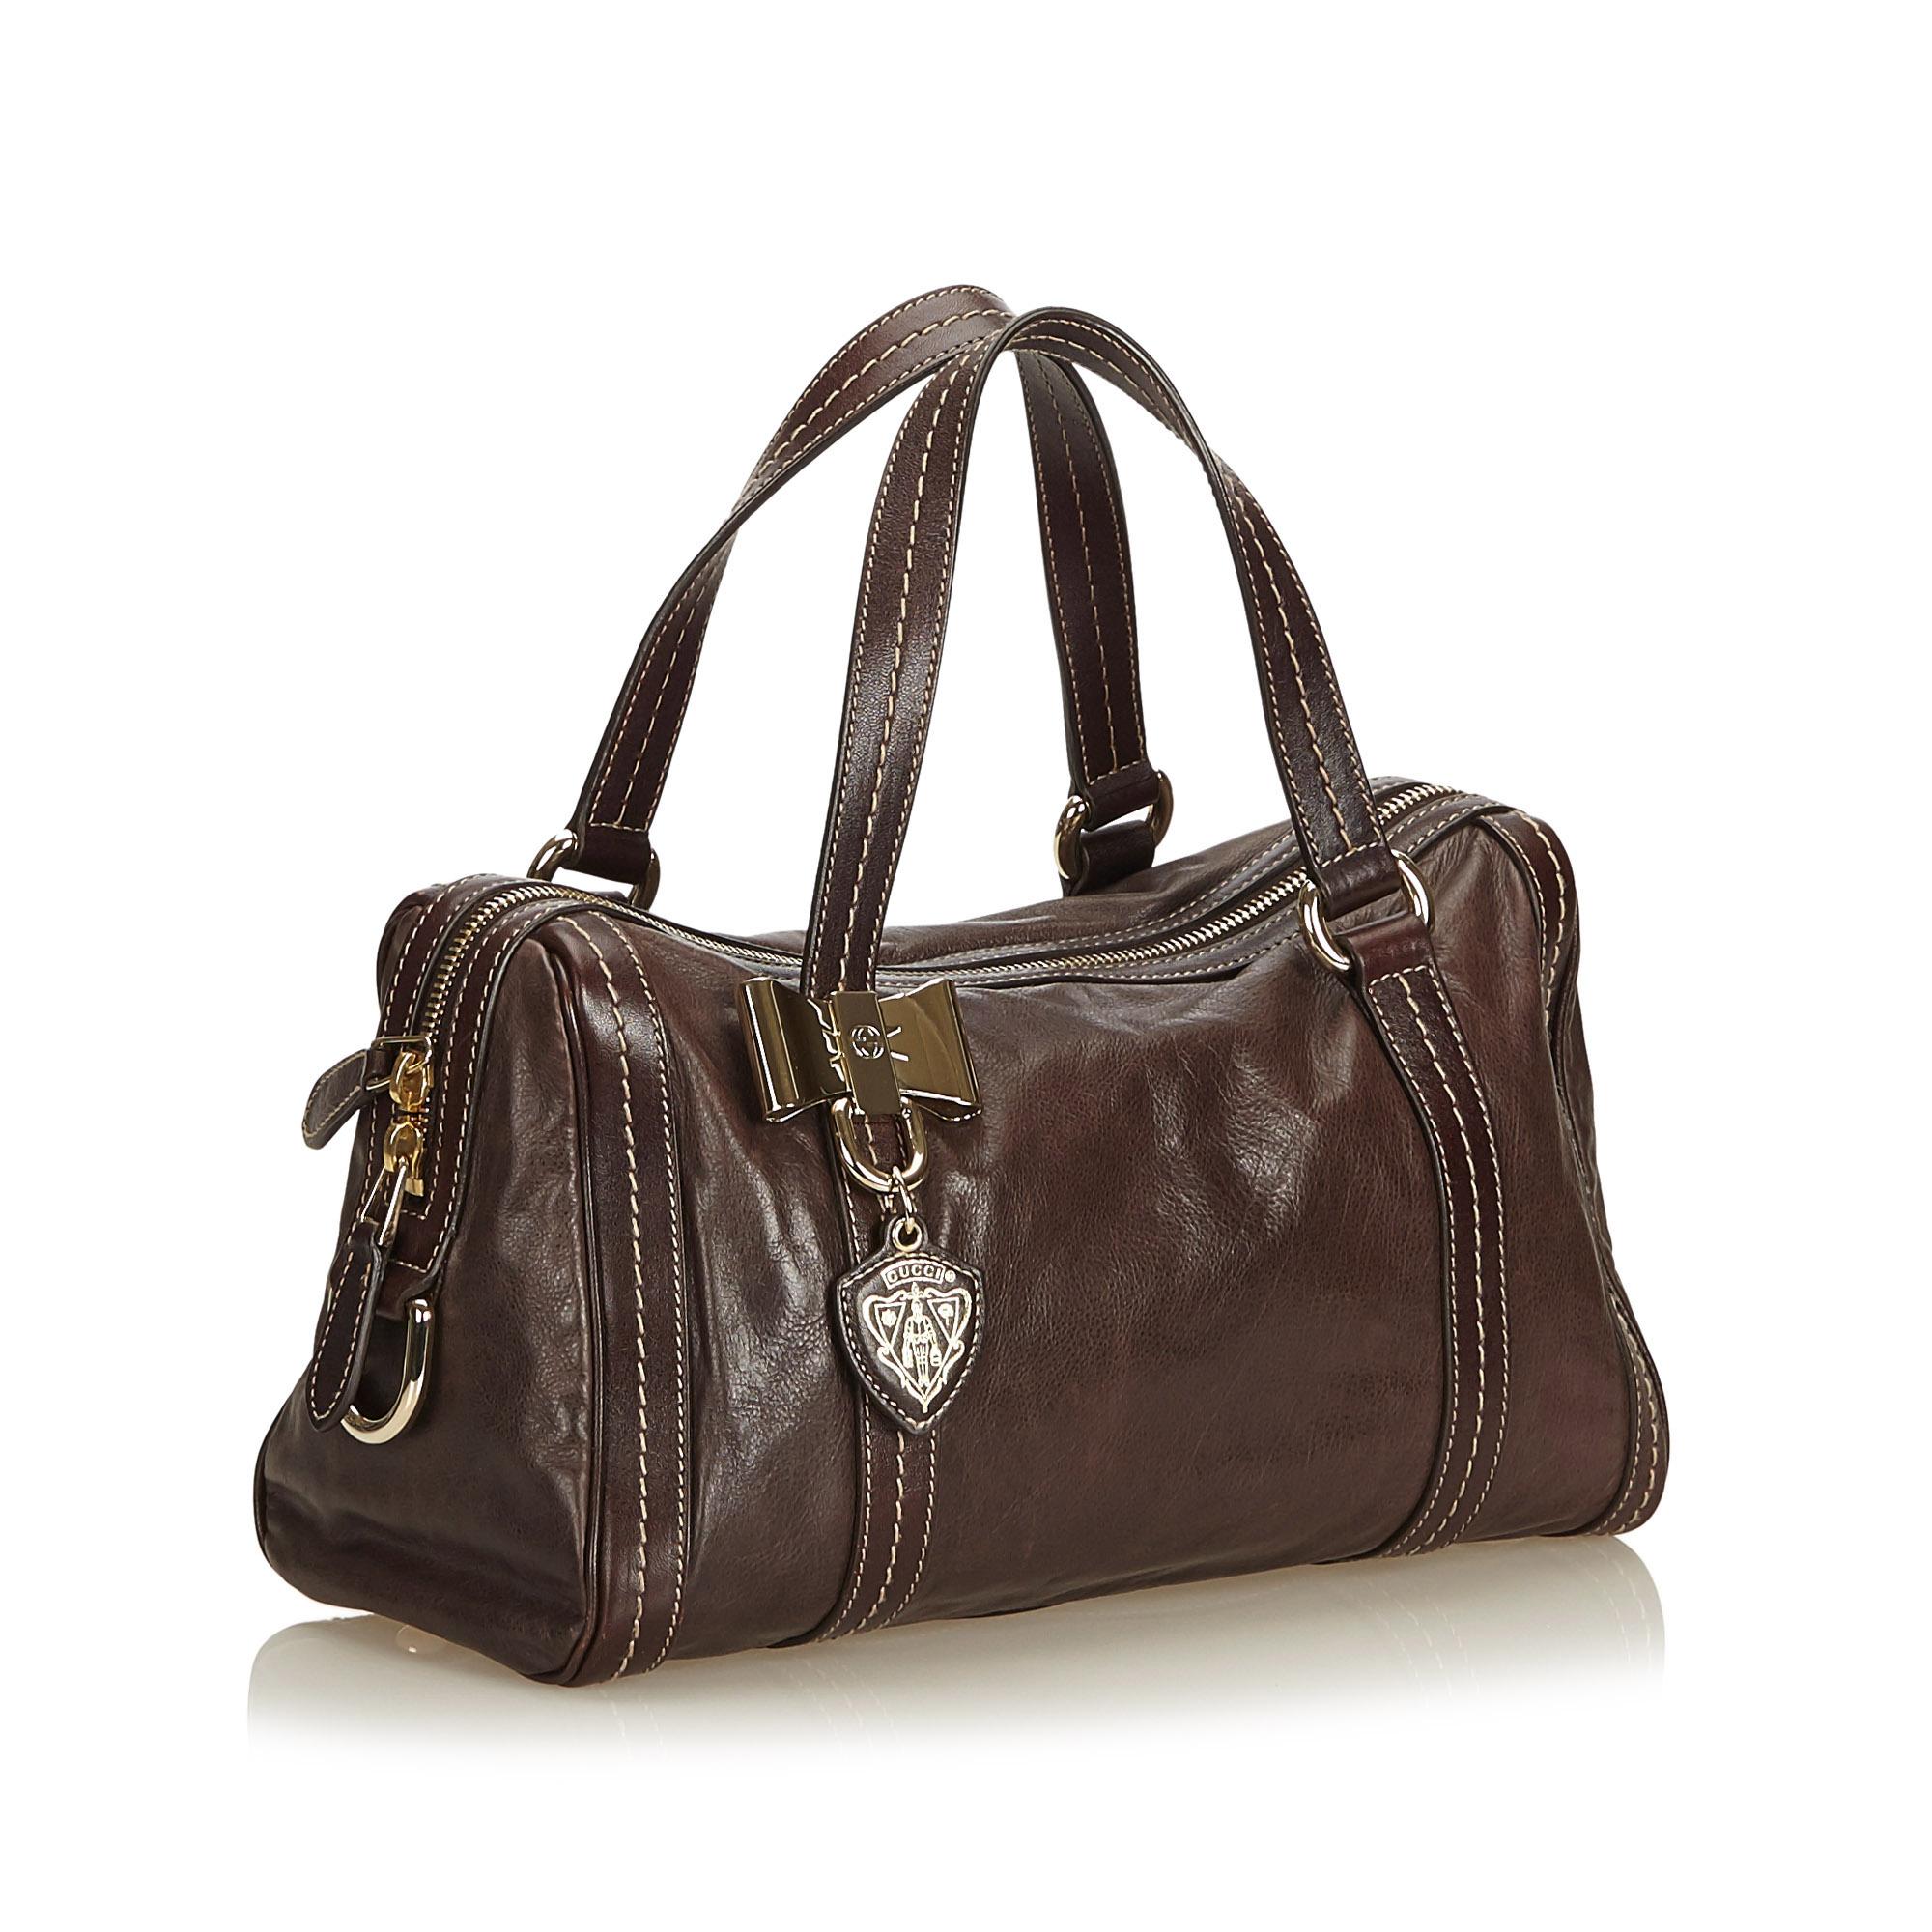 The Duchessa features a leather body, flat straps, a top zip closure, interior slip pockets, and an interior zip pocket. It carries as B+ condition rating.

Inclusions: 
This item does not come with inclusions.

Dimensions:
Length: 18.00 cm
Width: